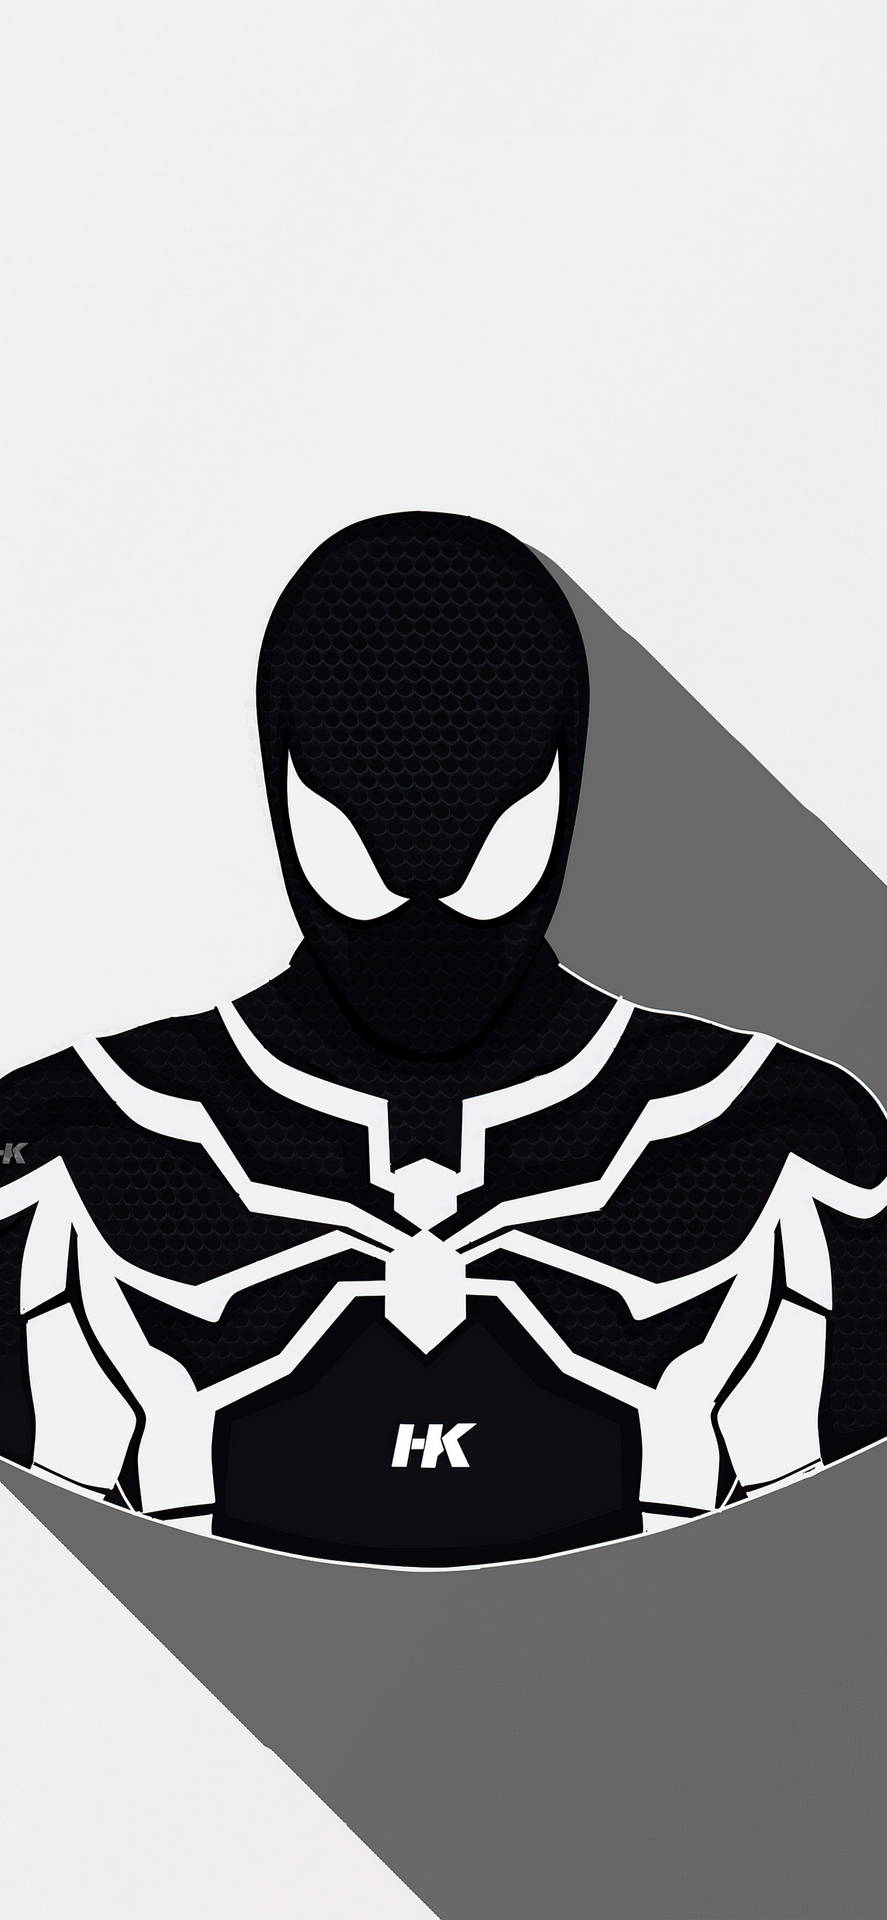 "spectacularly Colorful: The White Spiderman" Wallpaper